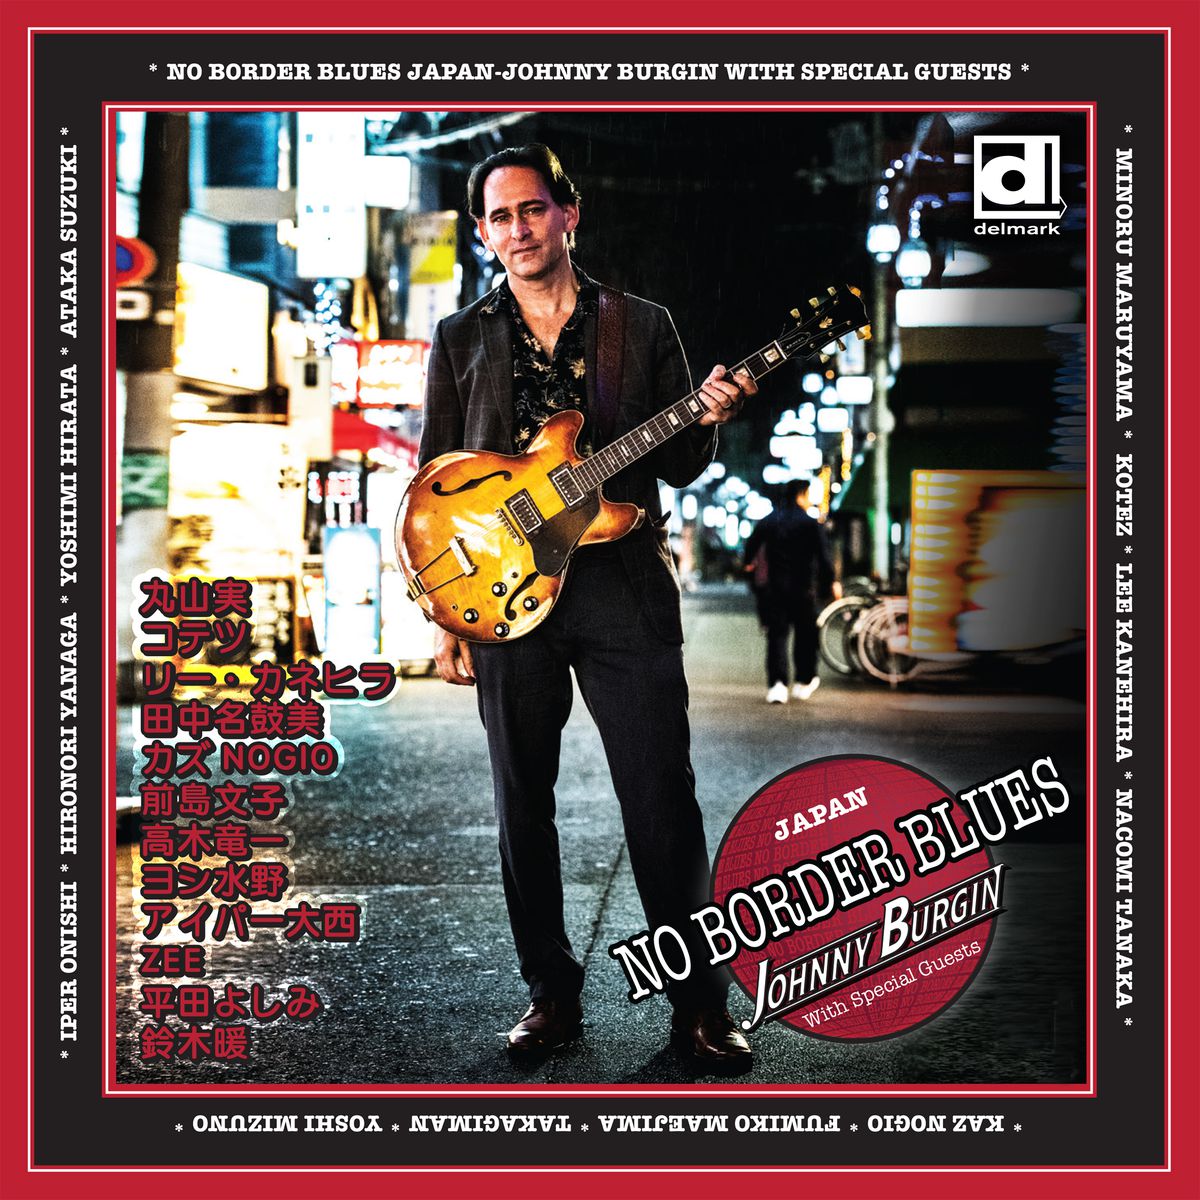 “No Border Blues Japan,” which is blues singer Johnny Burgin’s ninth studio album,&nbsp;features some of his favorite Japanese blues artists. 